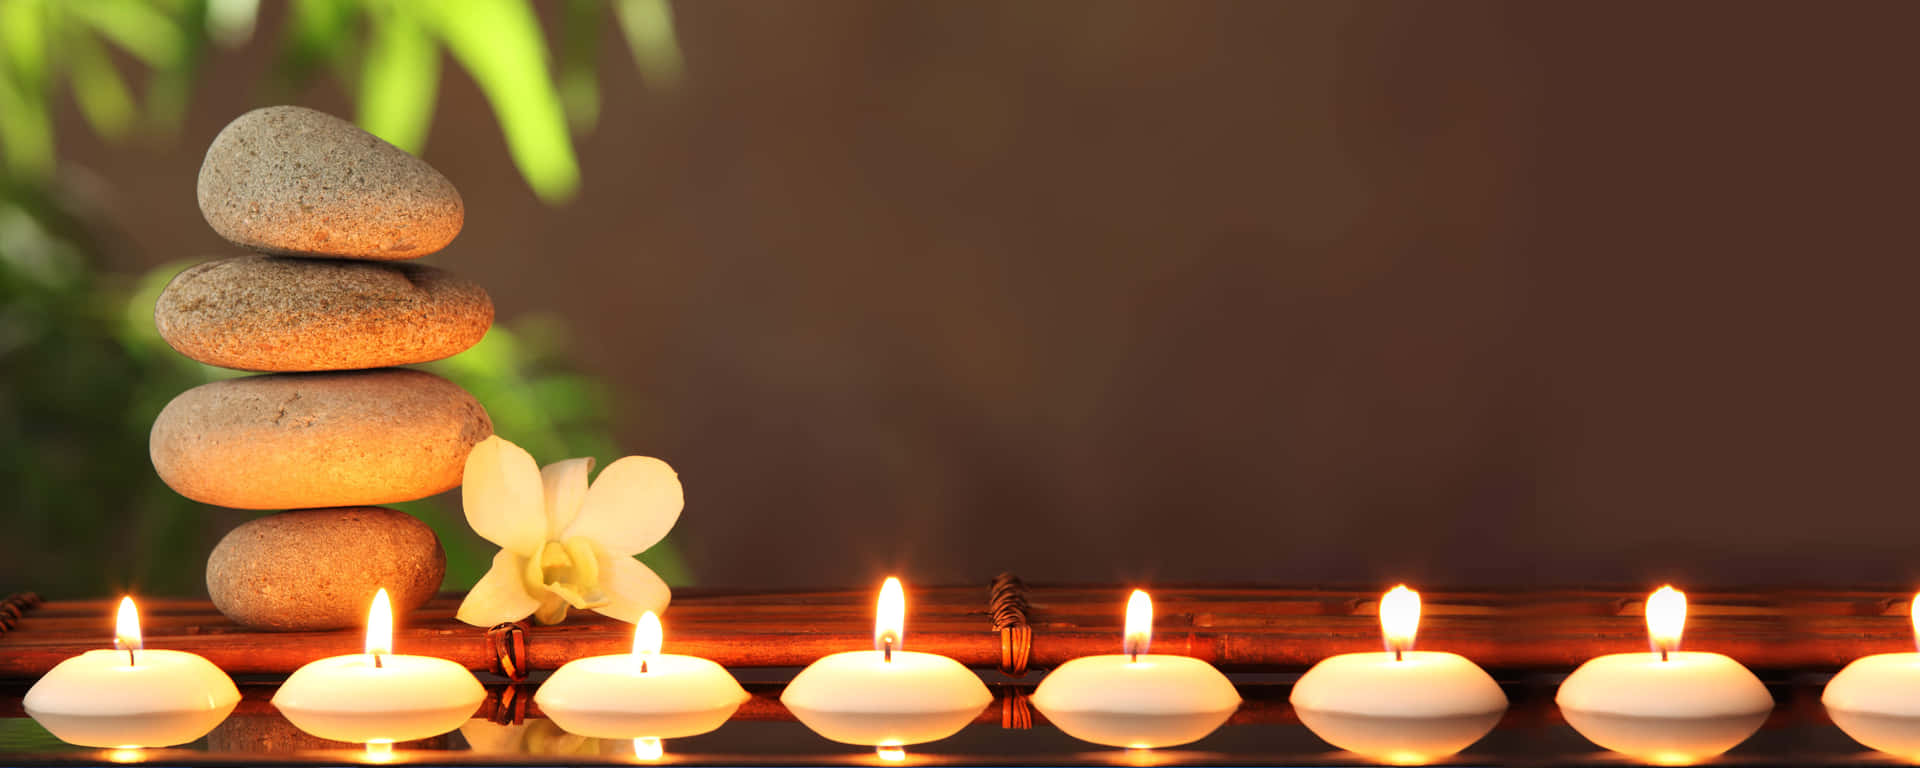 Spa Lit Candles And Gray Stones Picture